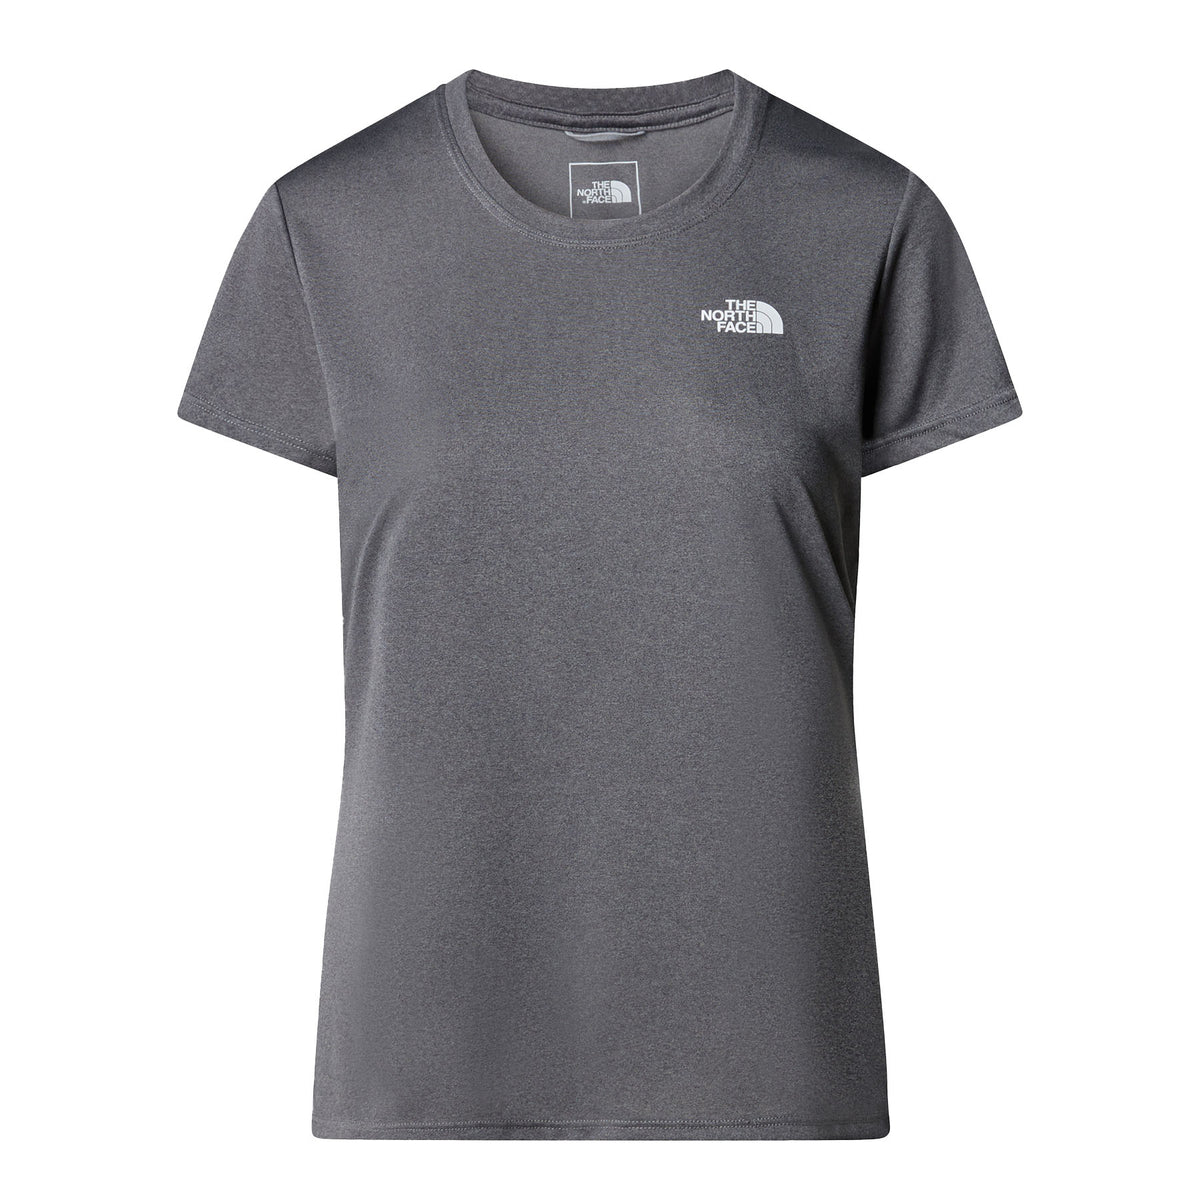 The North Face Women's Reaxion Amp Crew 